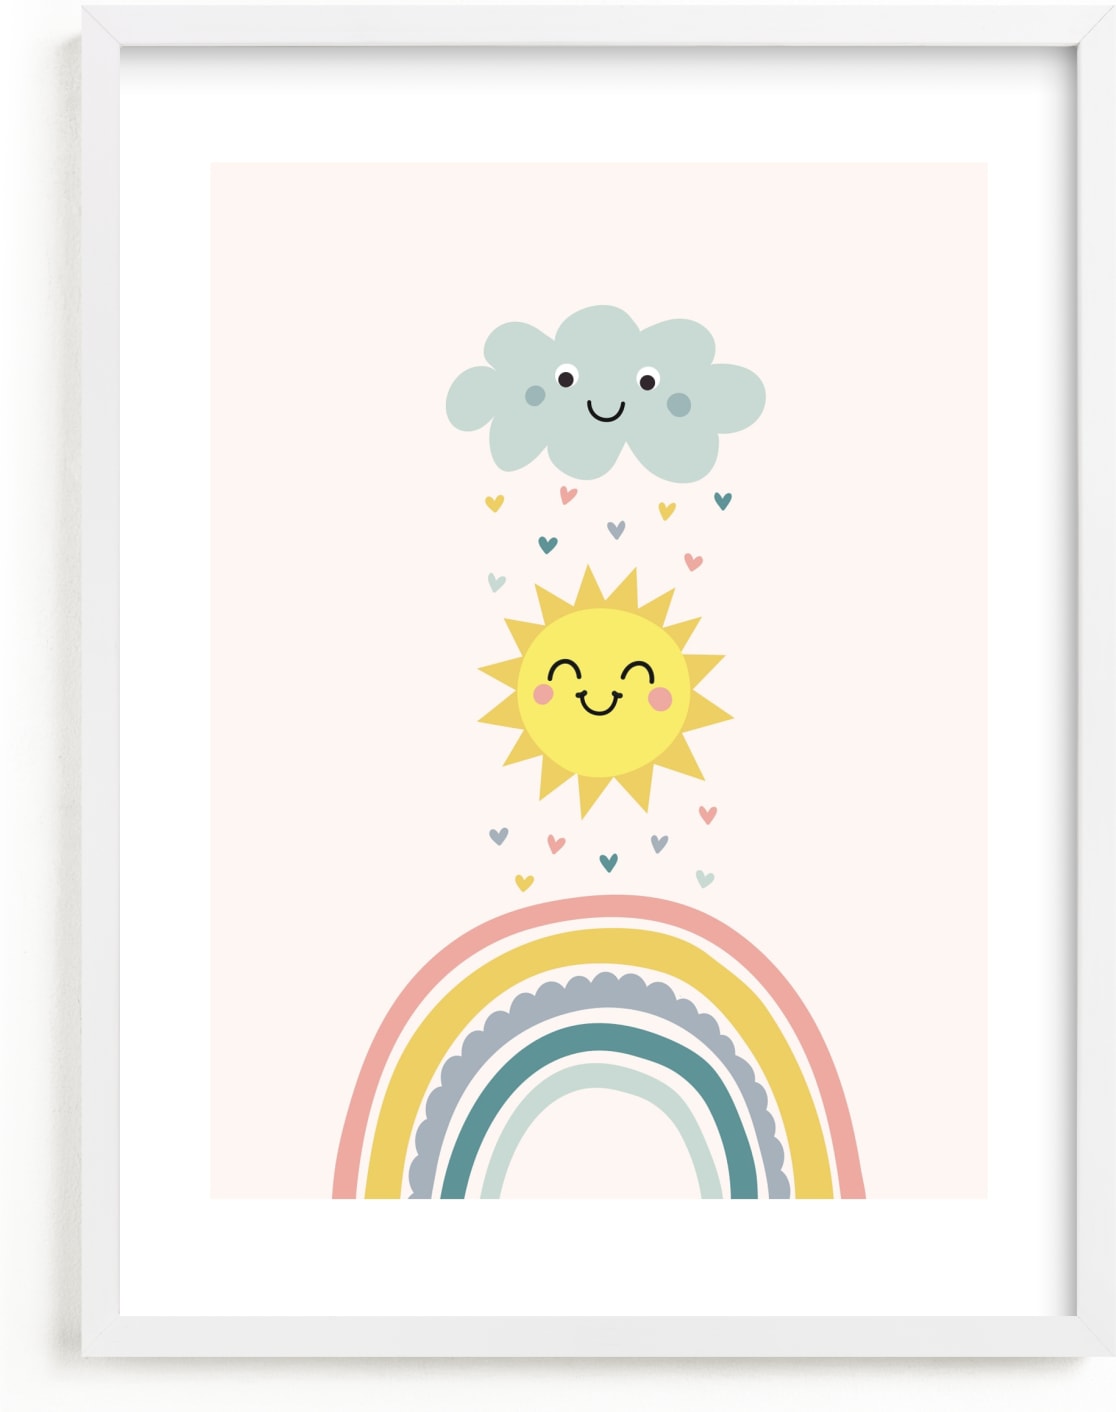 This is a colorful kids wall art by Annie Holmquist called How to make a rainbow.